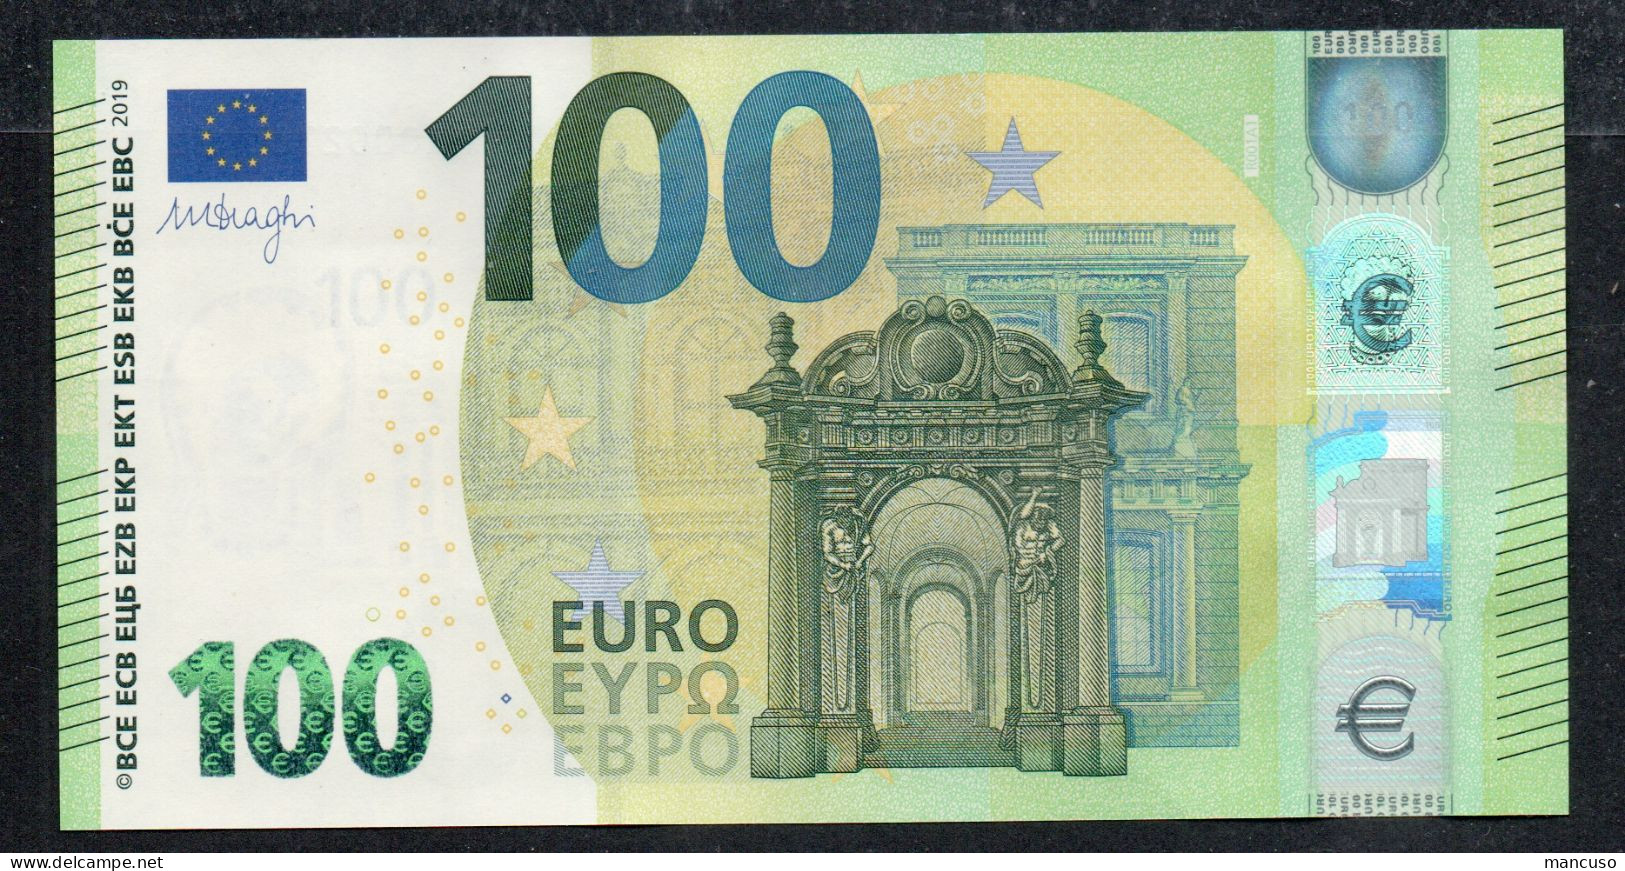 100 EURO GERMANY  RA000 R001 A1 FIRST POSITION  -   DRAGHI   UNC - 100 Euro